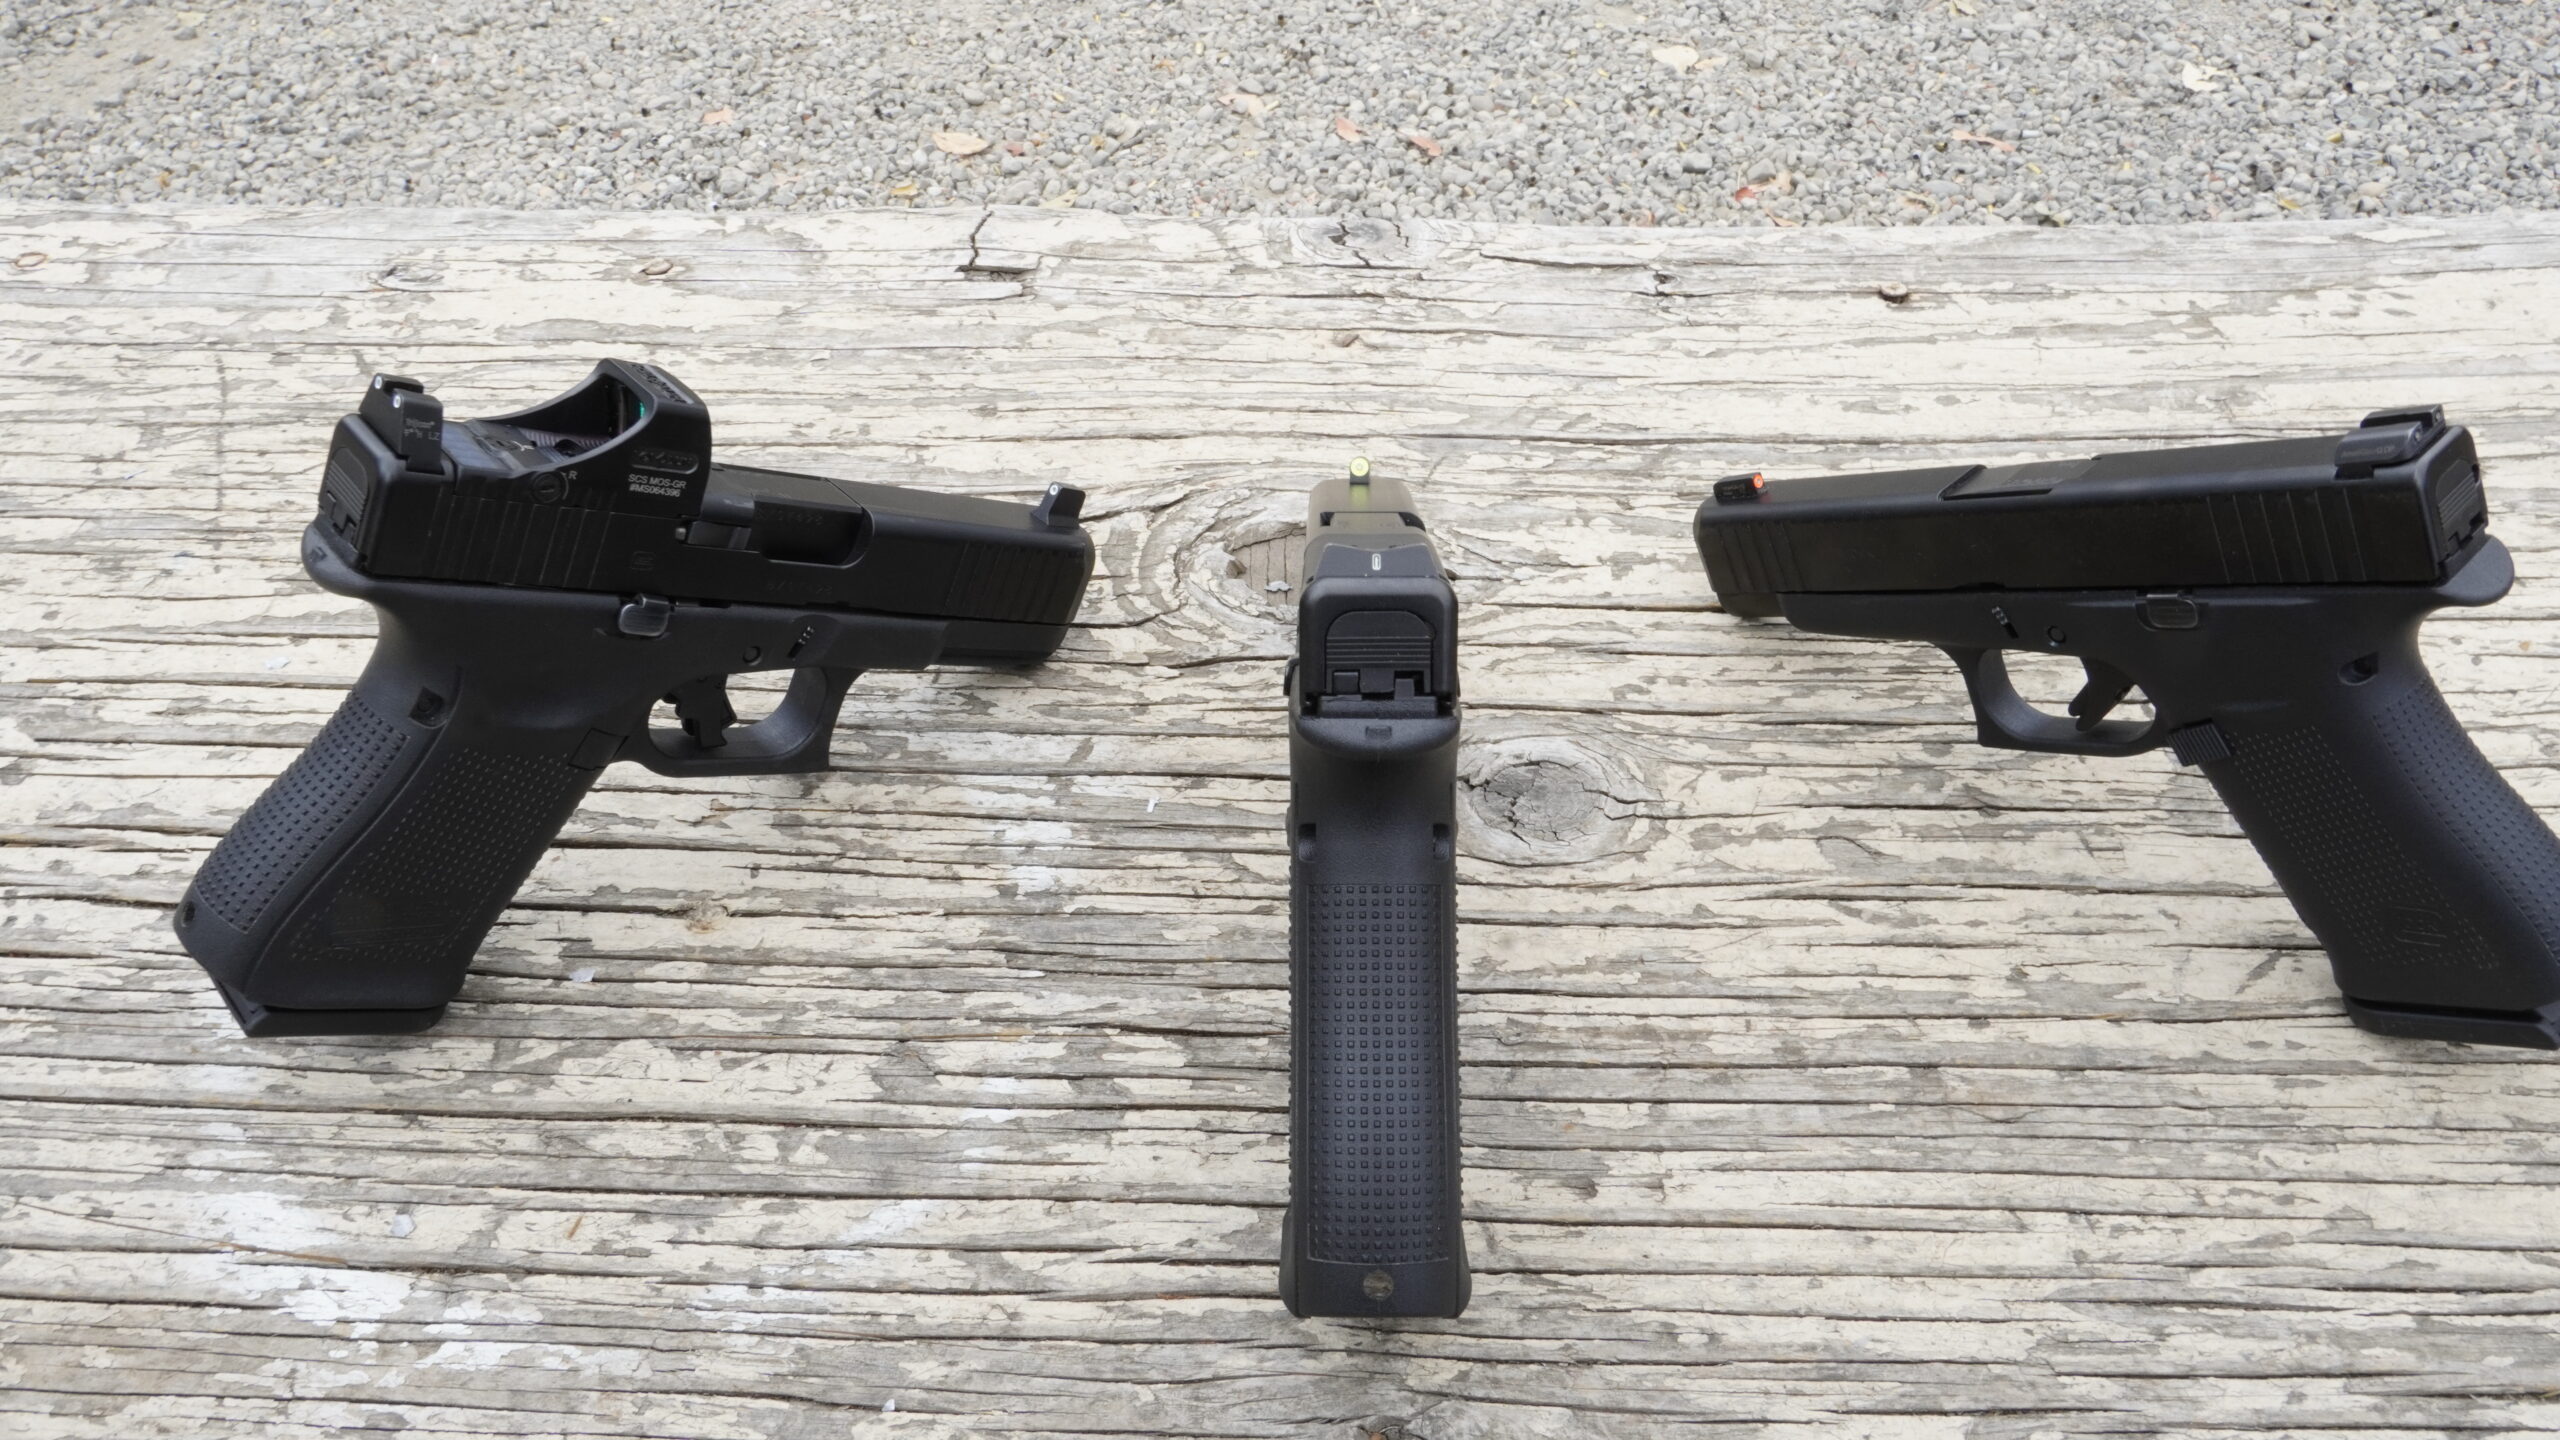 The author tested the best Glock sights on a variety of handguns.